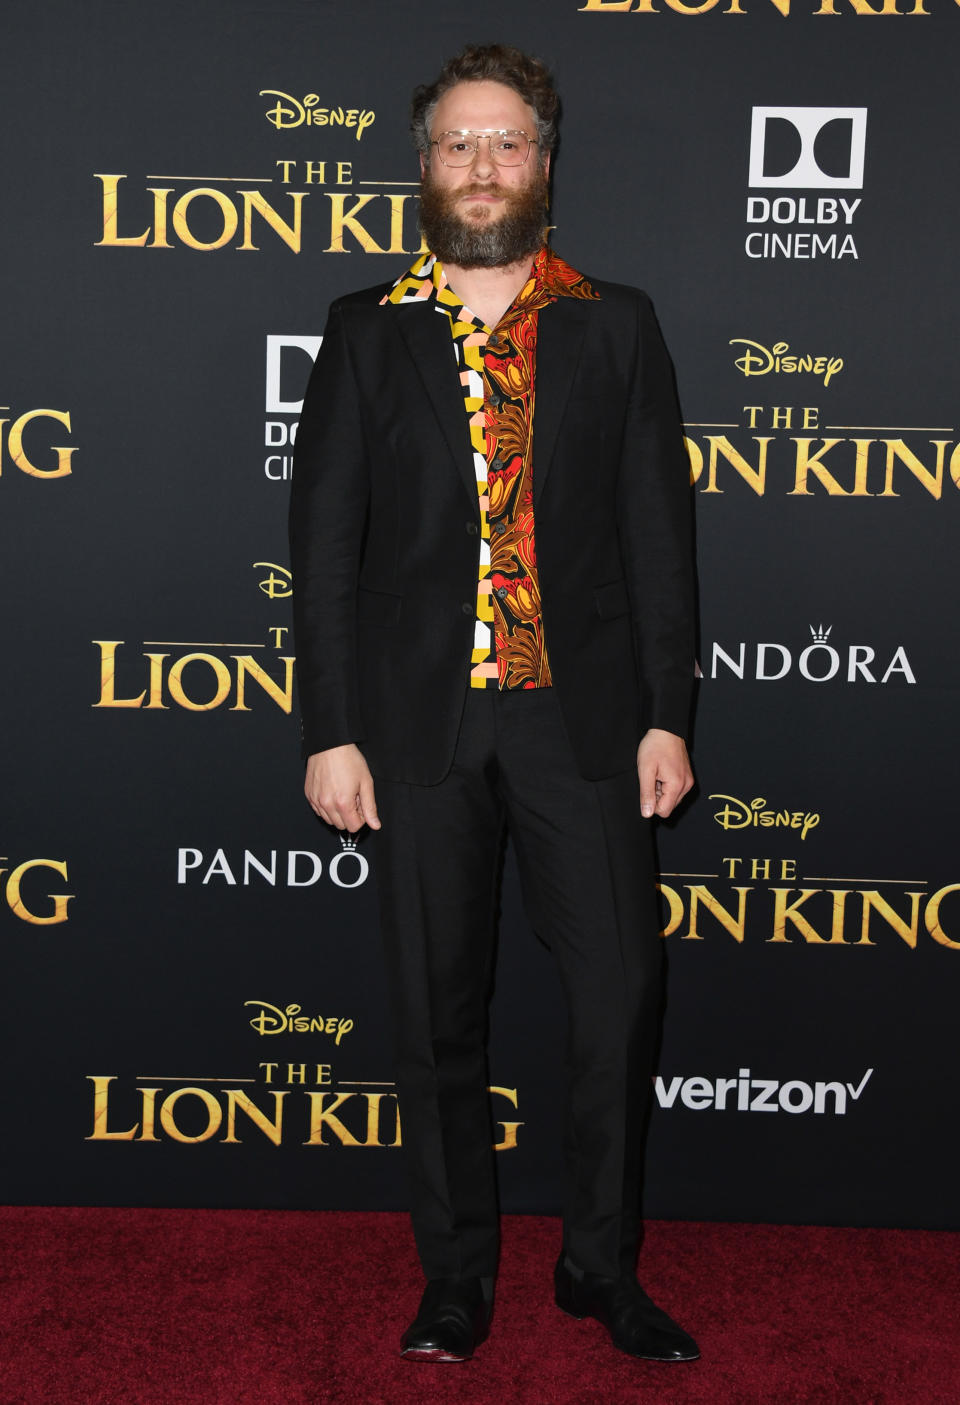 HOLLYWOOD, CALIFORNIA - JULY 09:  Seth Rogen attends the Premiere Of Disney's "The Lion King" at Dolby Theatre on July 09, 2019 in Hollywood, California. (Photo by Jon Kopaloff/FilmMagic)